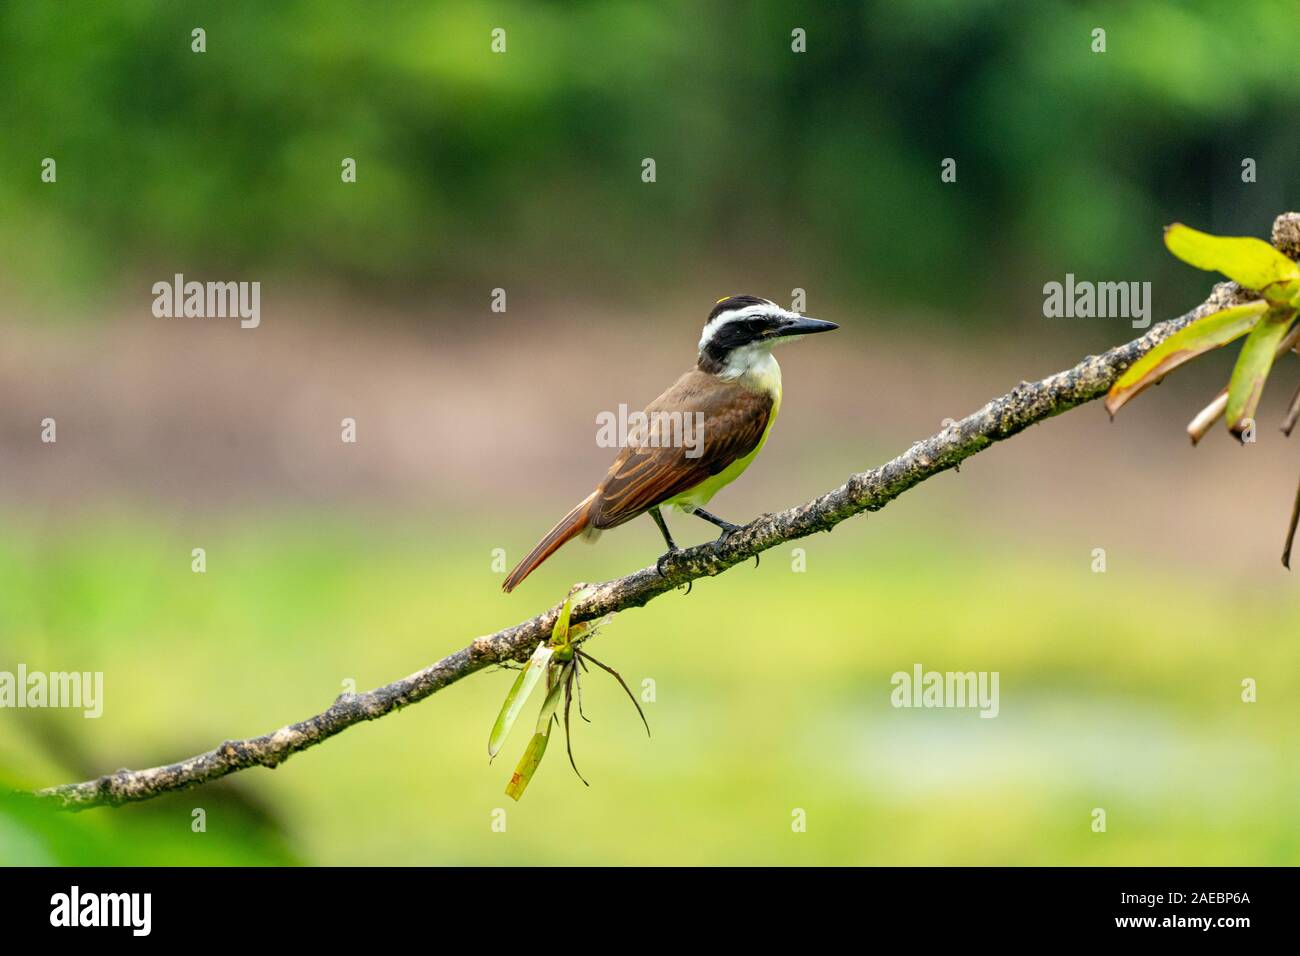 Great kiskadee on a branch. The great kiskadee (Pitangus sulphuratus) is a large tyrant flycatcher that is found from the Lower Rio Grande Valley in s Stock Photo